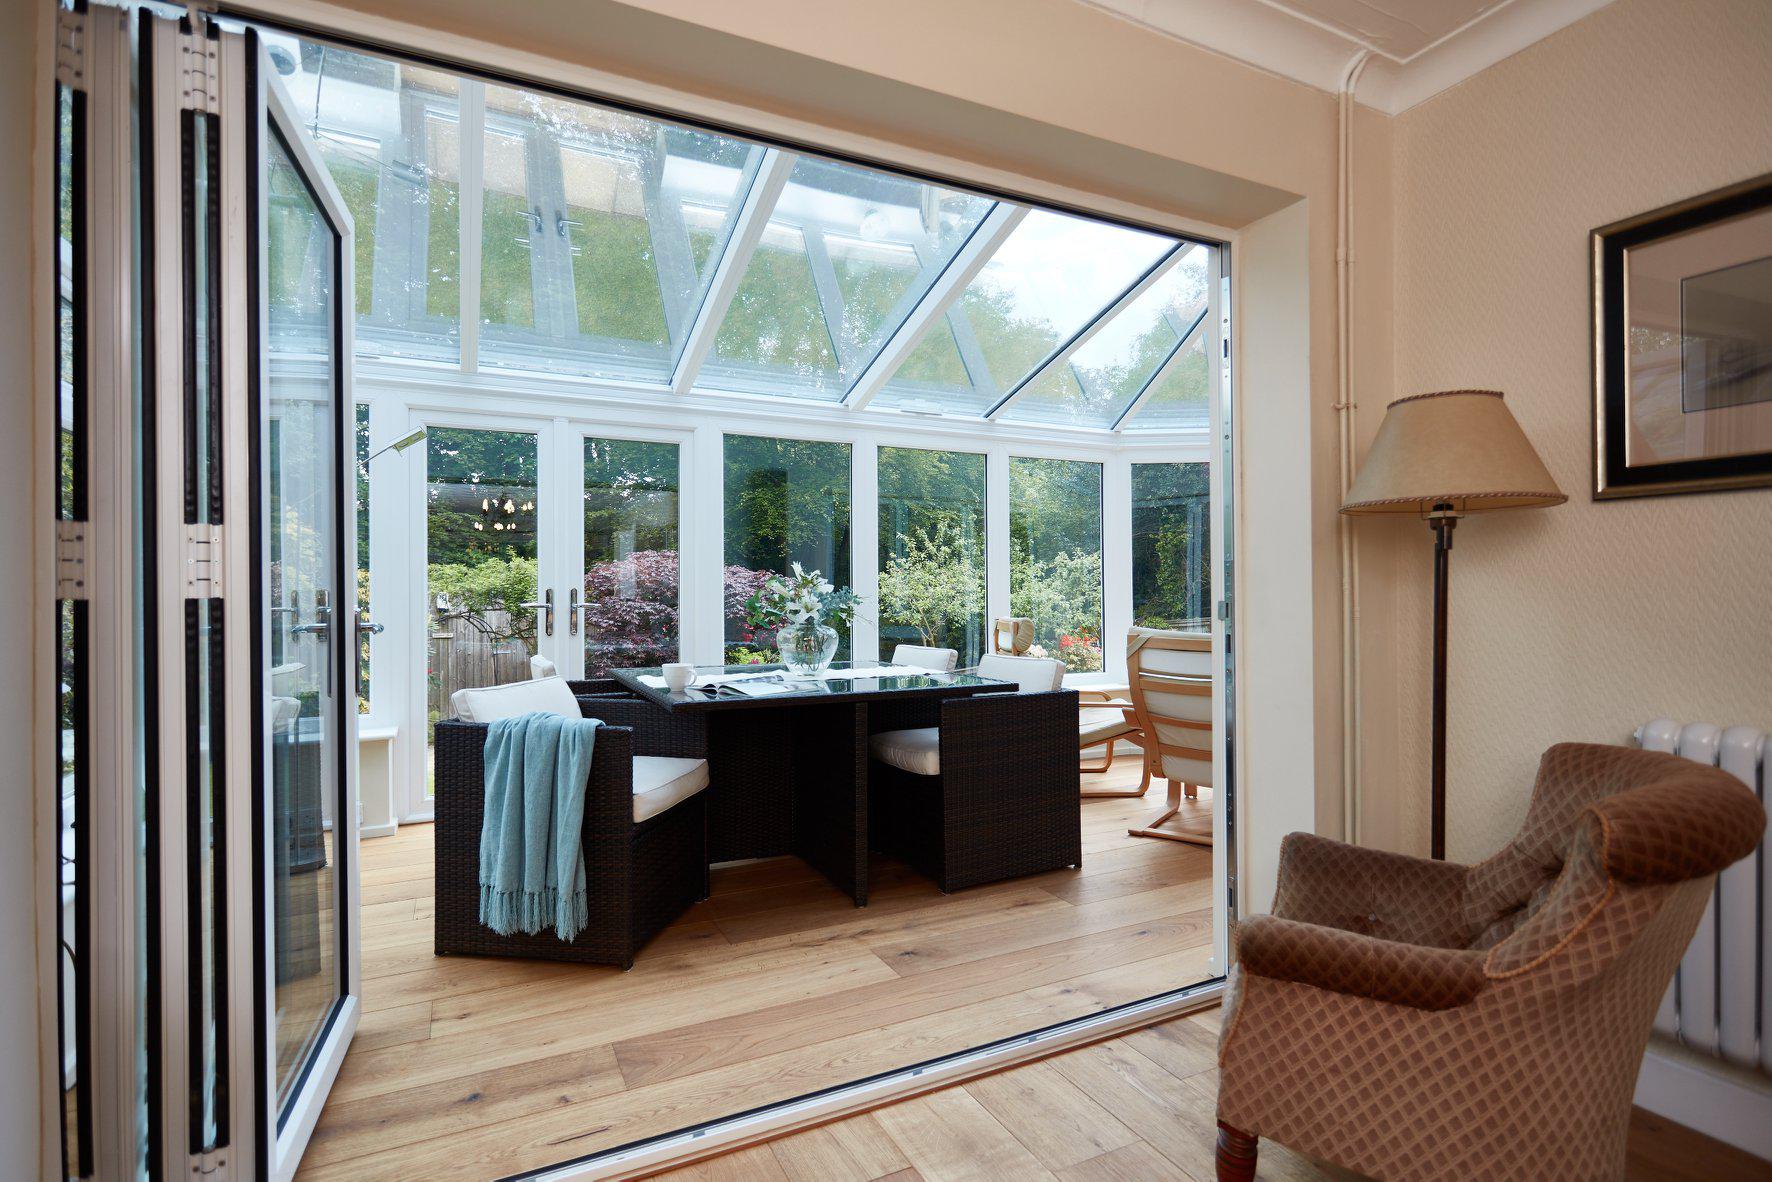 Our bifold doors are made from aluminium, a material known for its durability and bold range of colours. Unlike uPVC or wood, aluminium bifold doors have slimmer frames that can support larger panes of glass to make for some impressive views.